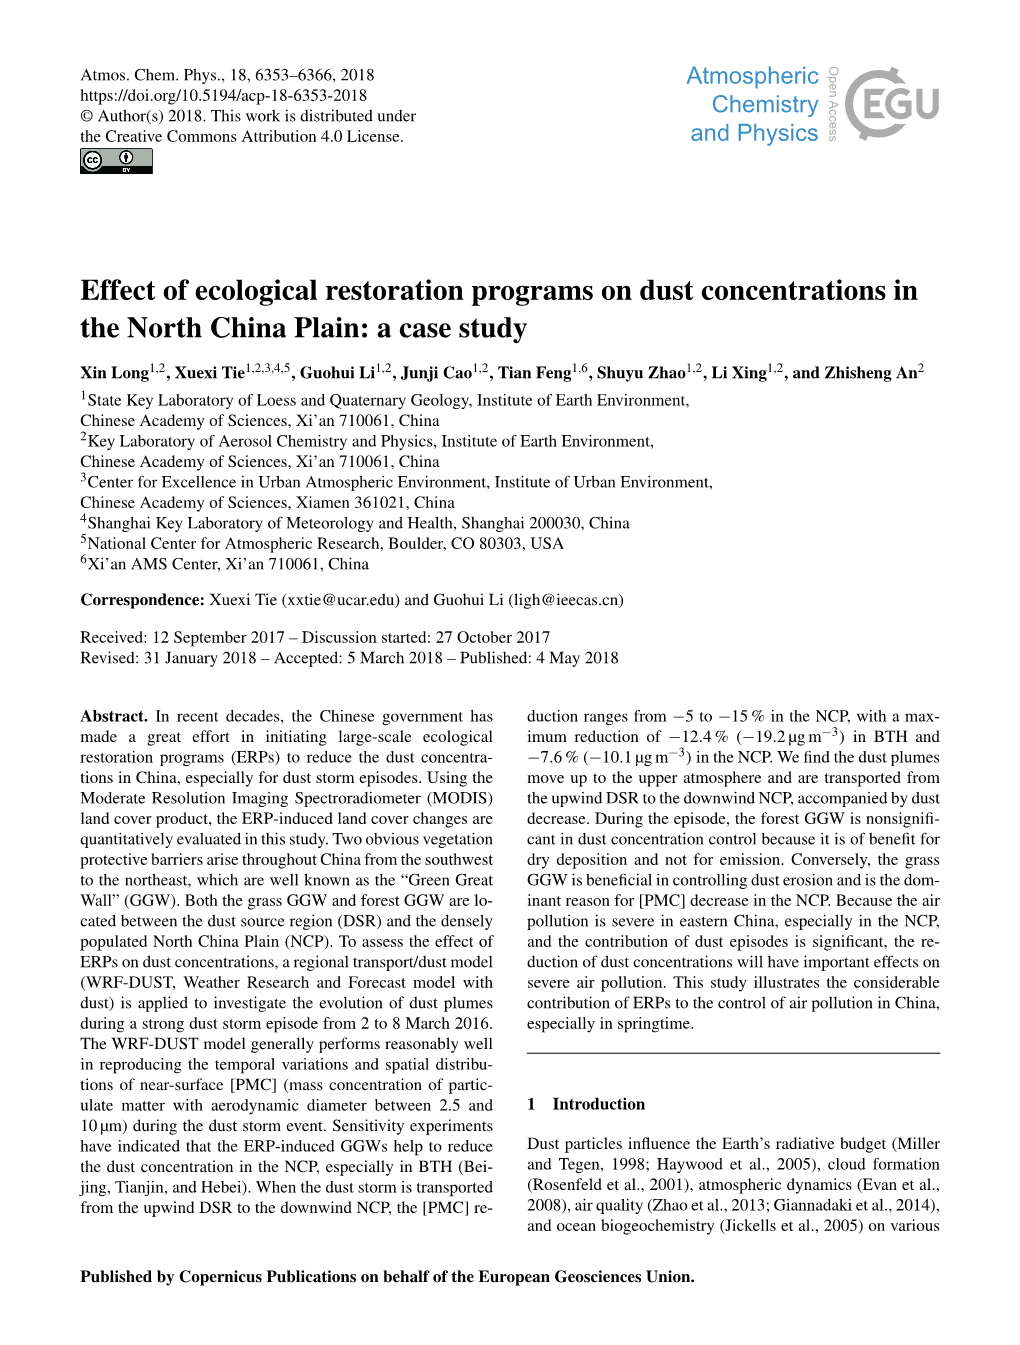 Effect of Ecological Restoration Programs on Dust Concentrations in the North China Plain: a Case Study